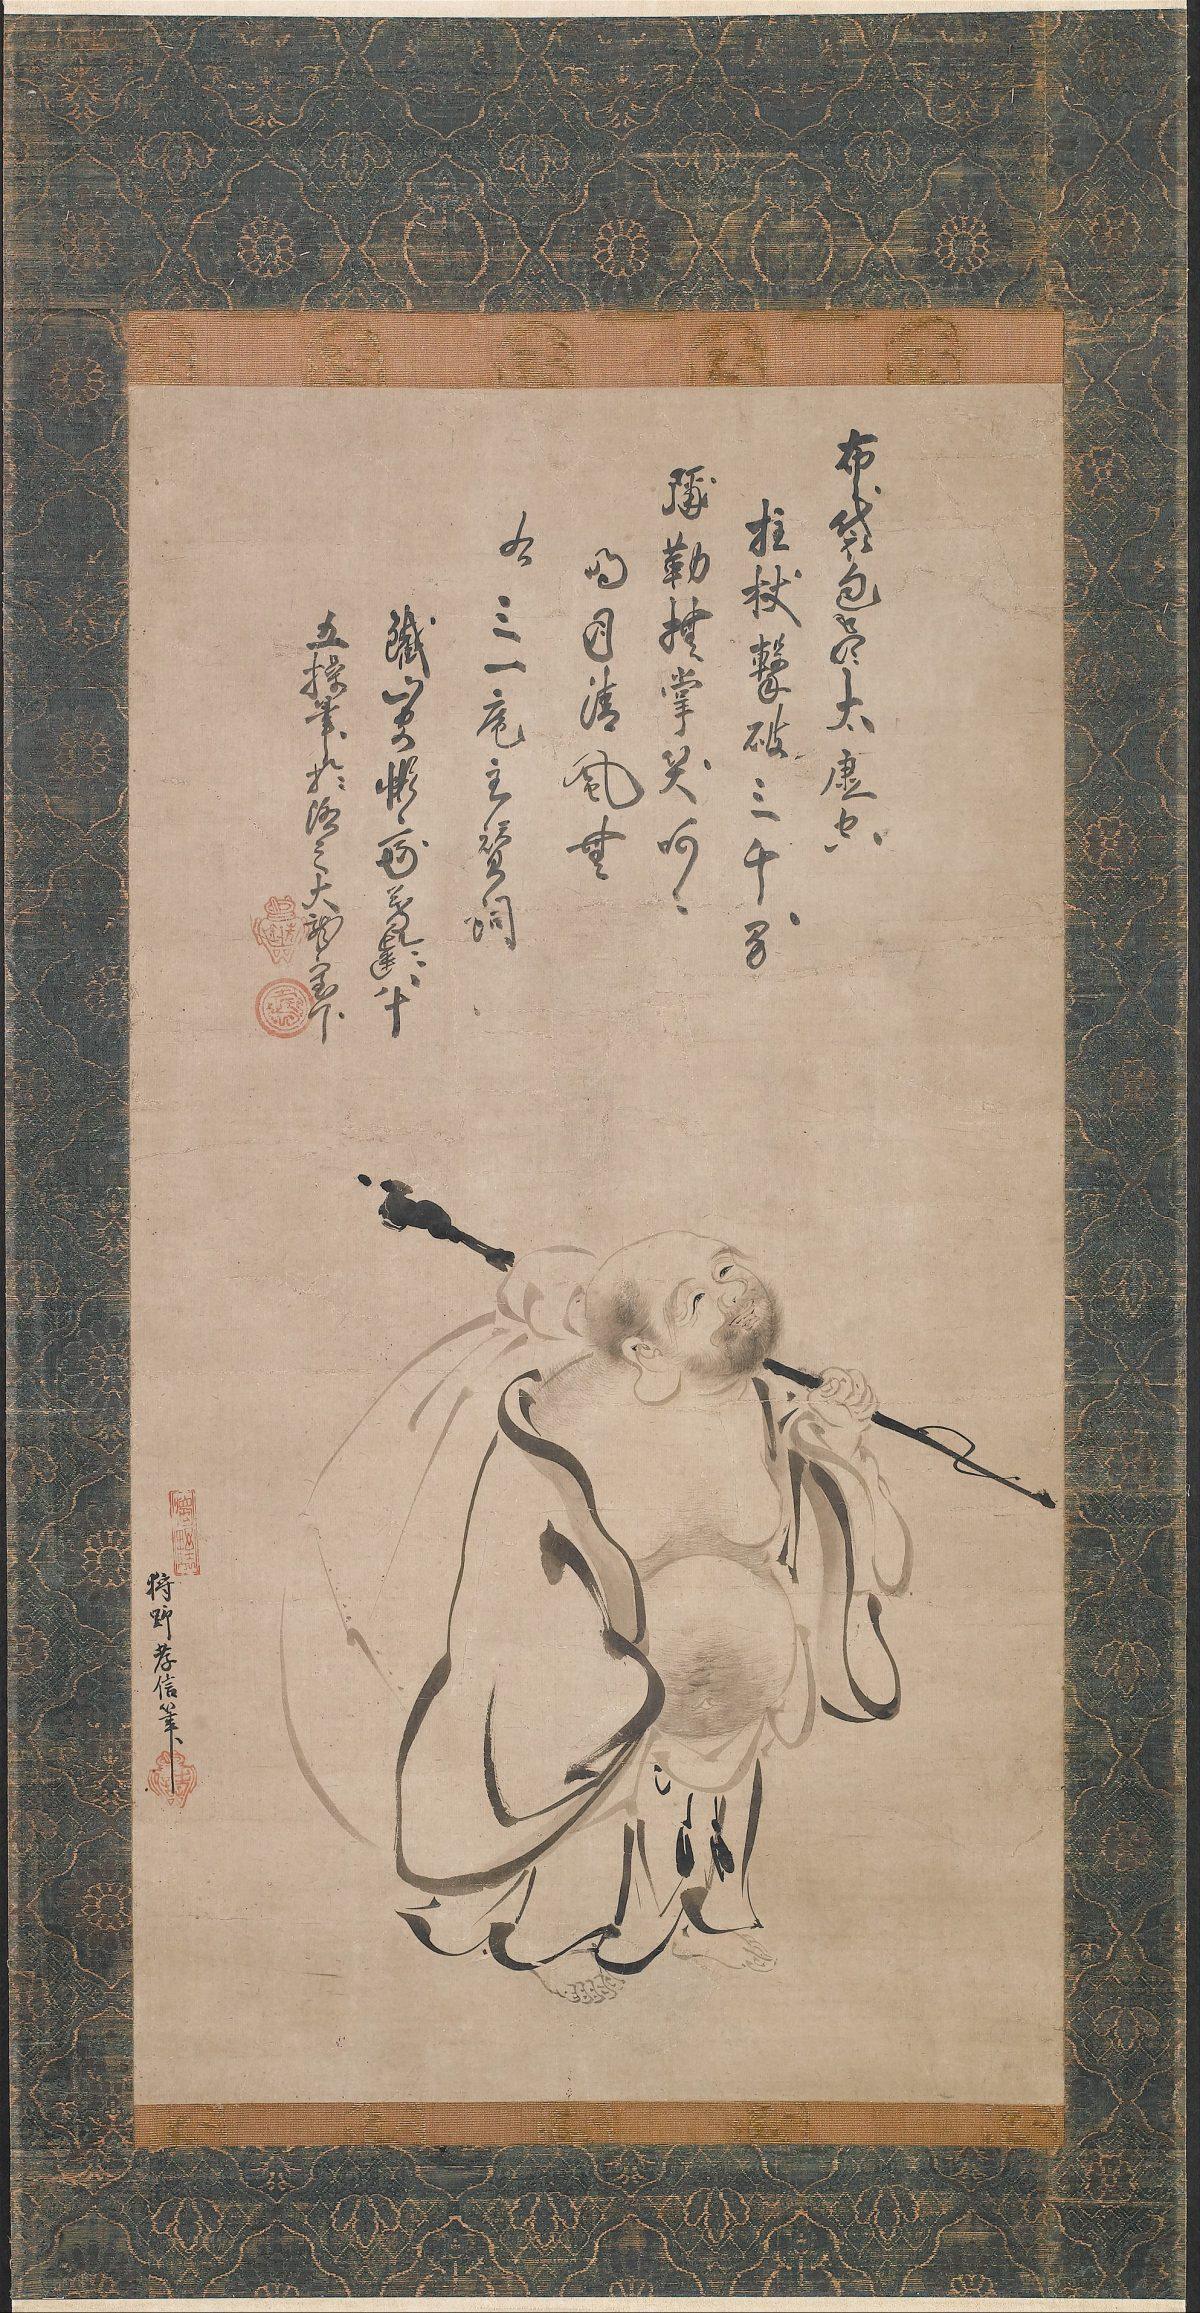 Portrait of Hotei, Edo period (1615–1868), dated 1616. This portrait by Kano Takanobu (1571–1618) depicts Hotei, a popular figure in the Zen pantheon, who is often shown as a chubby, good-humored monk carrying a large sack. He is believed to have lived in southern China in the late ninth century and was eventually recognized as a manifestation of Miroku, the Buddha of the Future. (The Metropolitan Museum of Art)